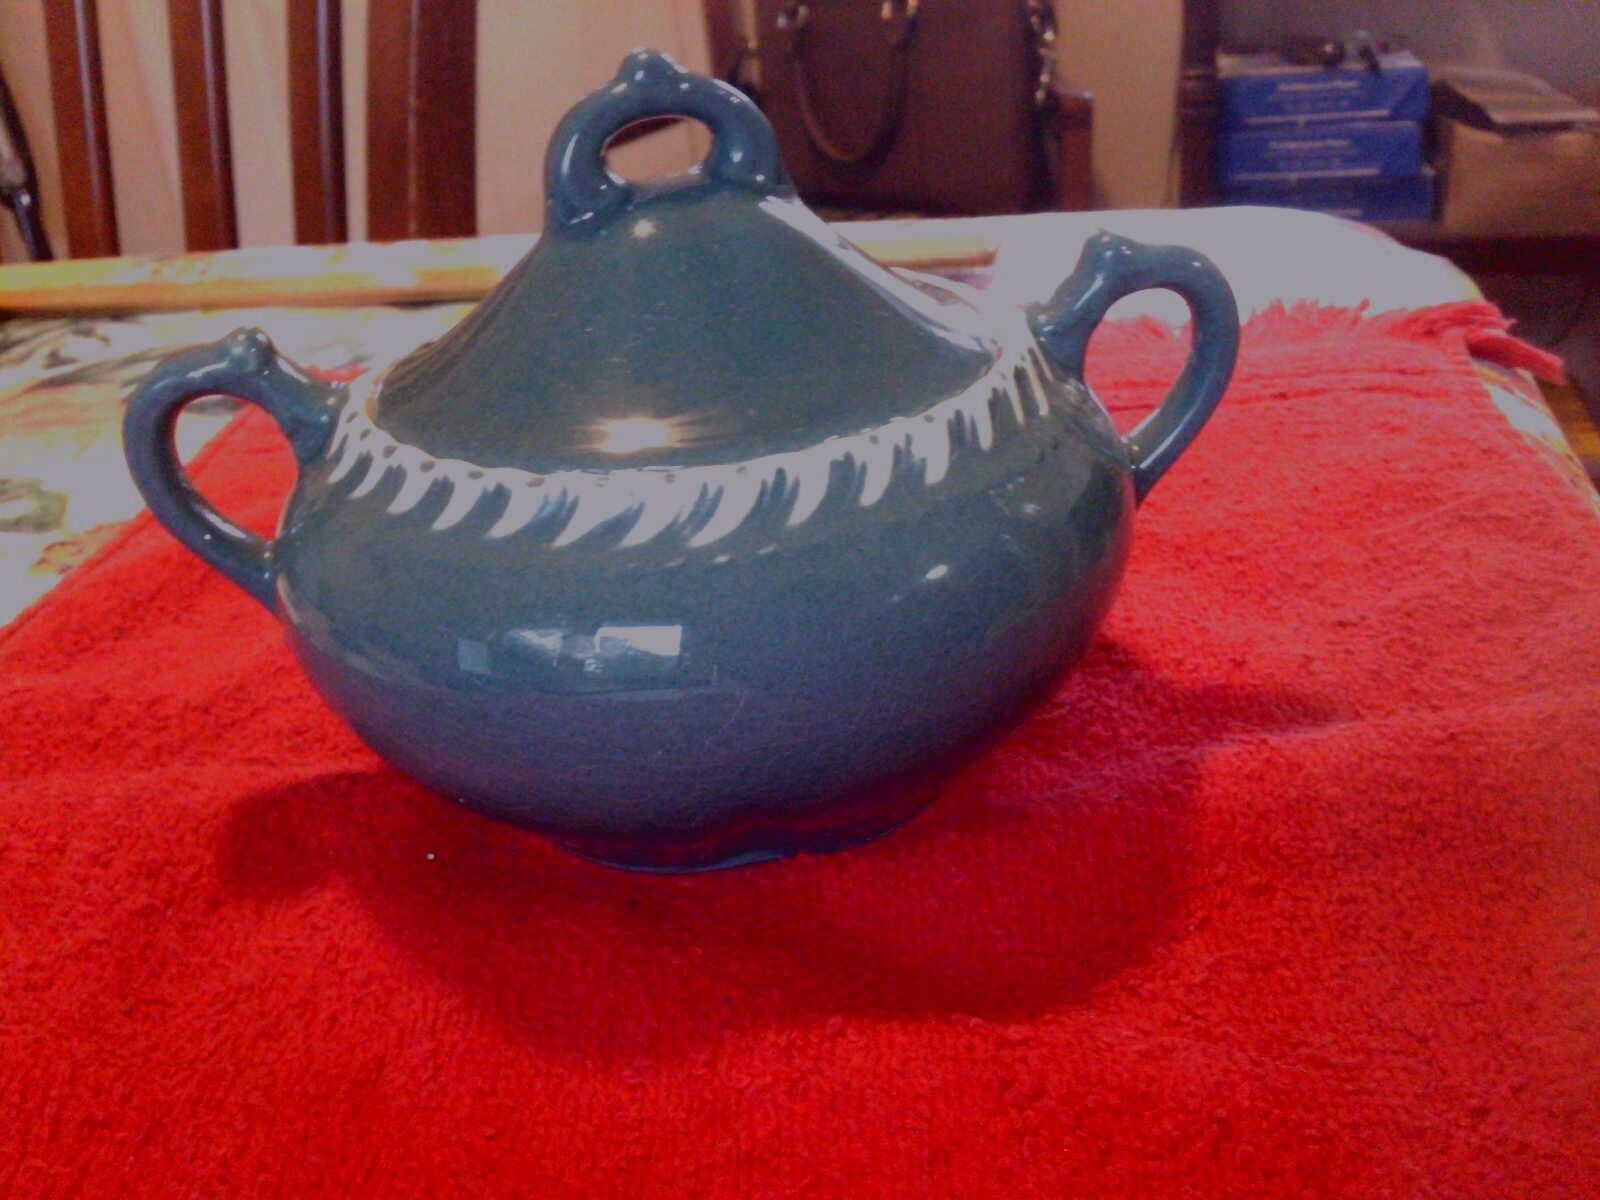 Vintage Harkerware Pottery Covered Sugar Bowl Teal Green White Trim